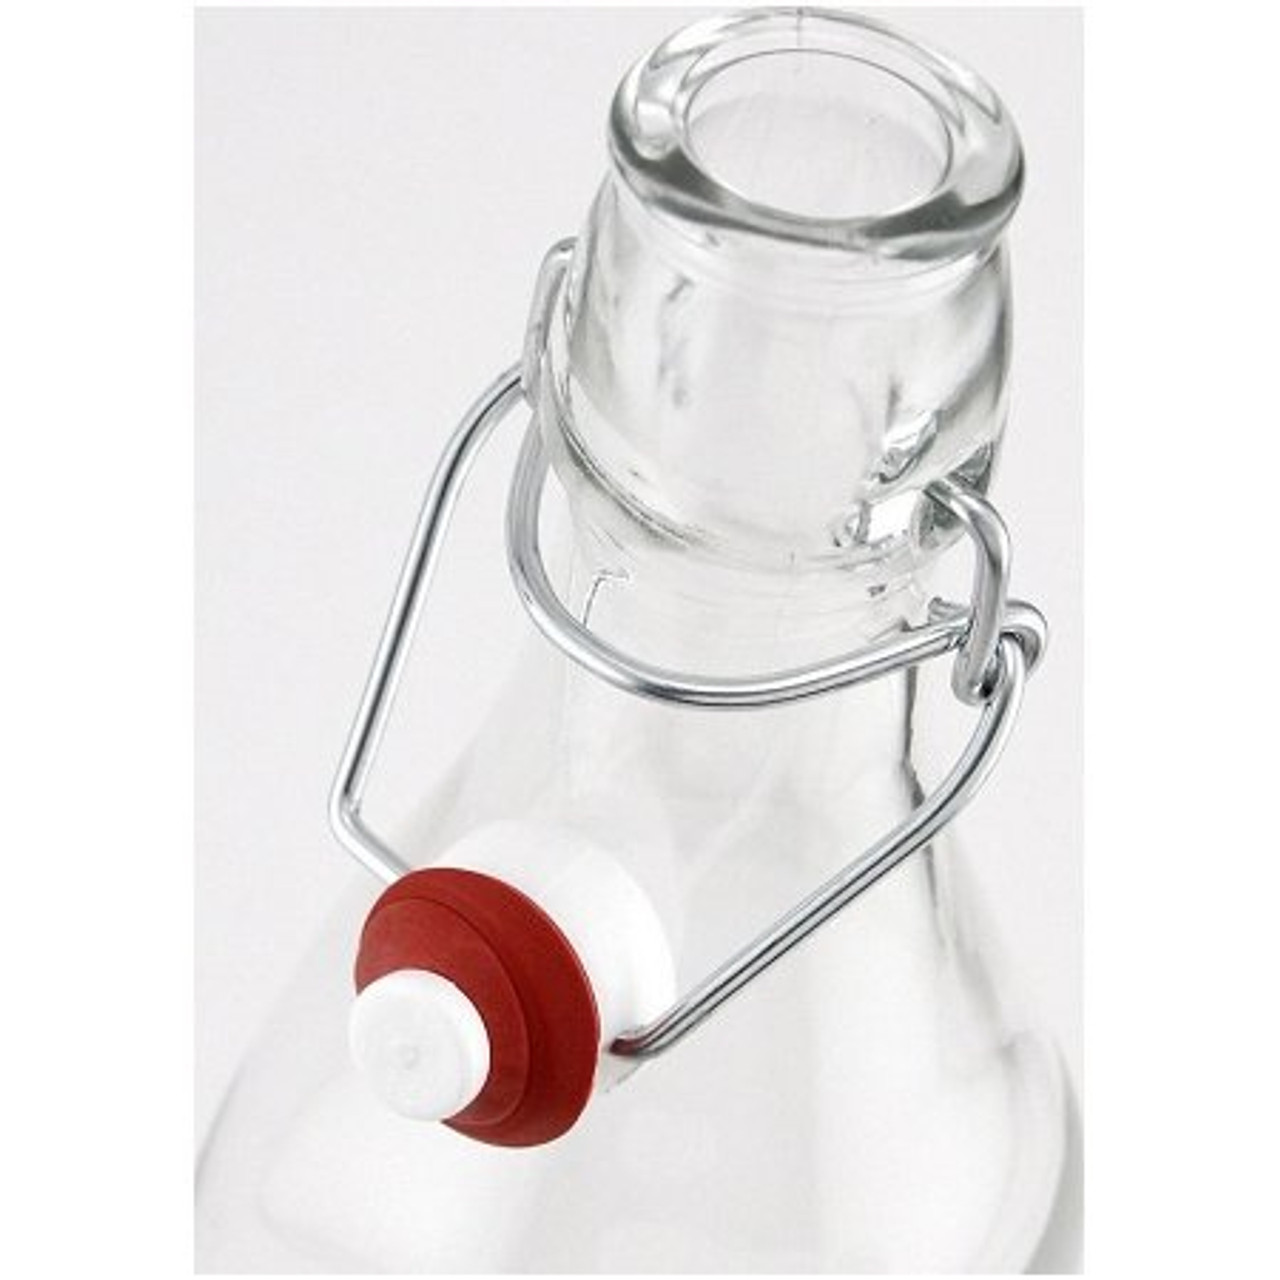 https://cdn11.bigcommerce.com/s-i8kspjl41w/images/stencil/1280x1280/products/3473/7028/bormioli-rocco-swing-top-glass-bottles-with-stopper-clear-all-sizes_2-compressed__05347.1598620865.jpg?c=2